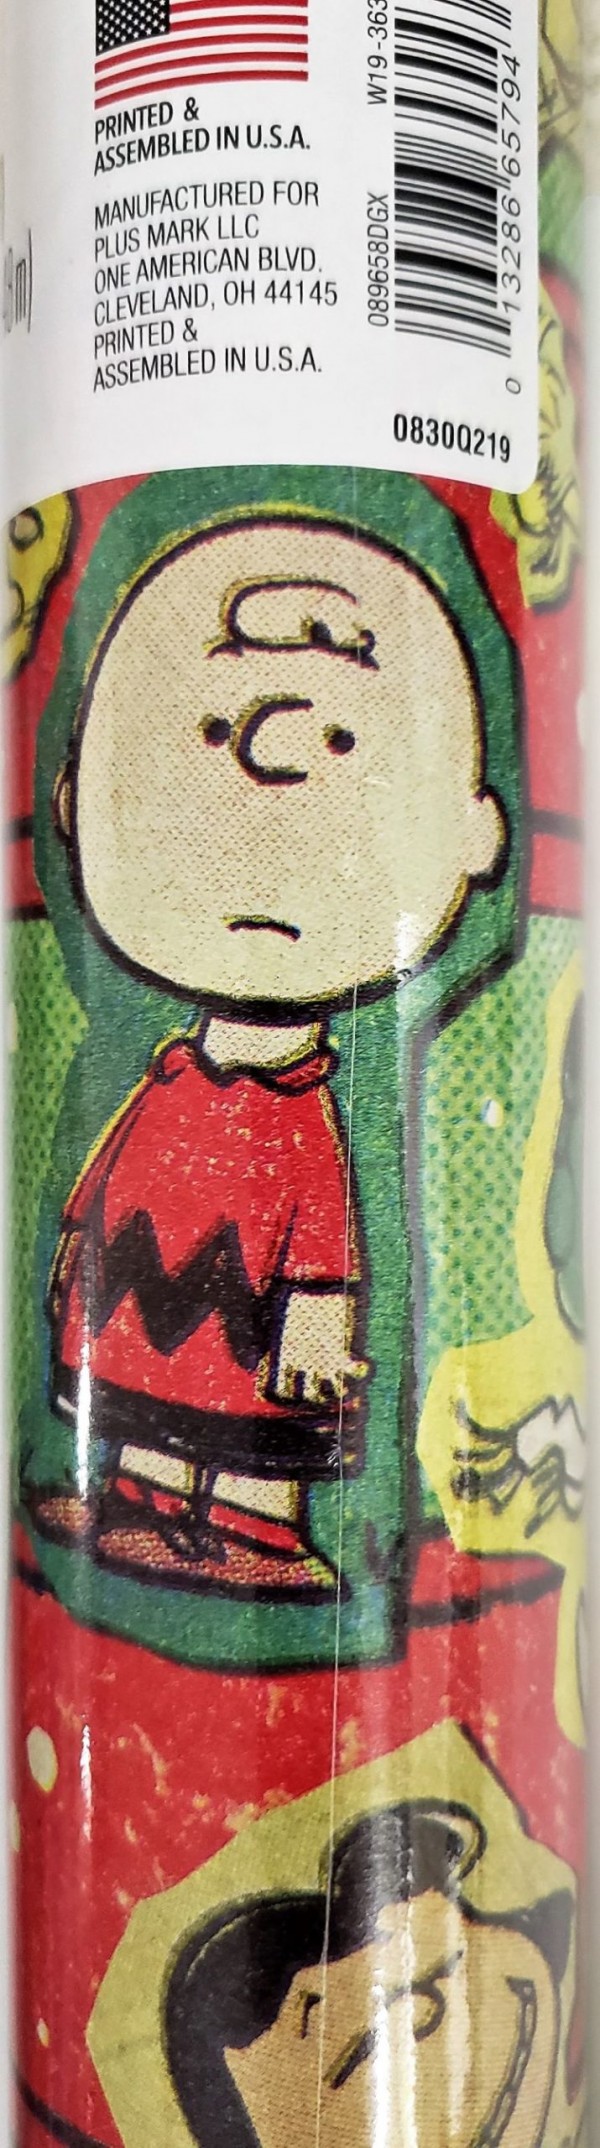 Peanuts Snoopy Charlie Brown Roll of Gift Wrap 60 Sq. Ft.